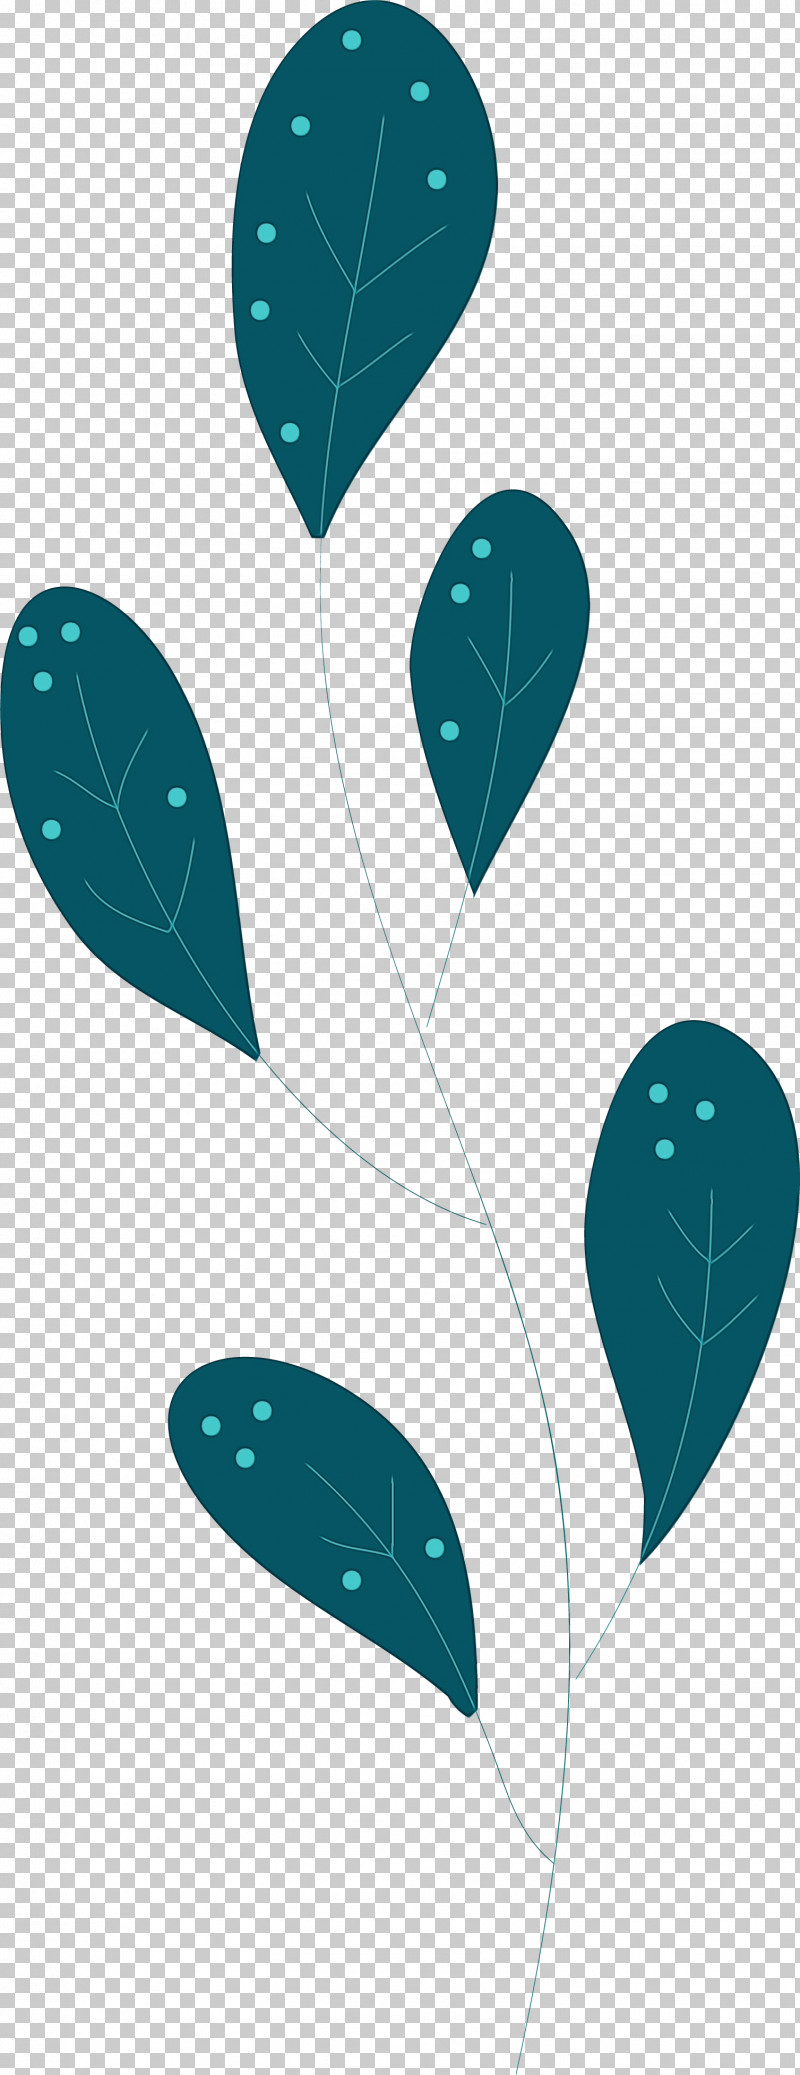 Leaf Turquoise Biology Plant Structure Plants PNG, Clipart, Biology, Leaf, Paint, Plants, Plant Structure Free PNG Download